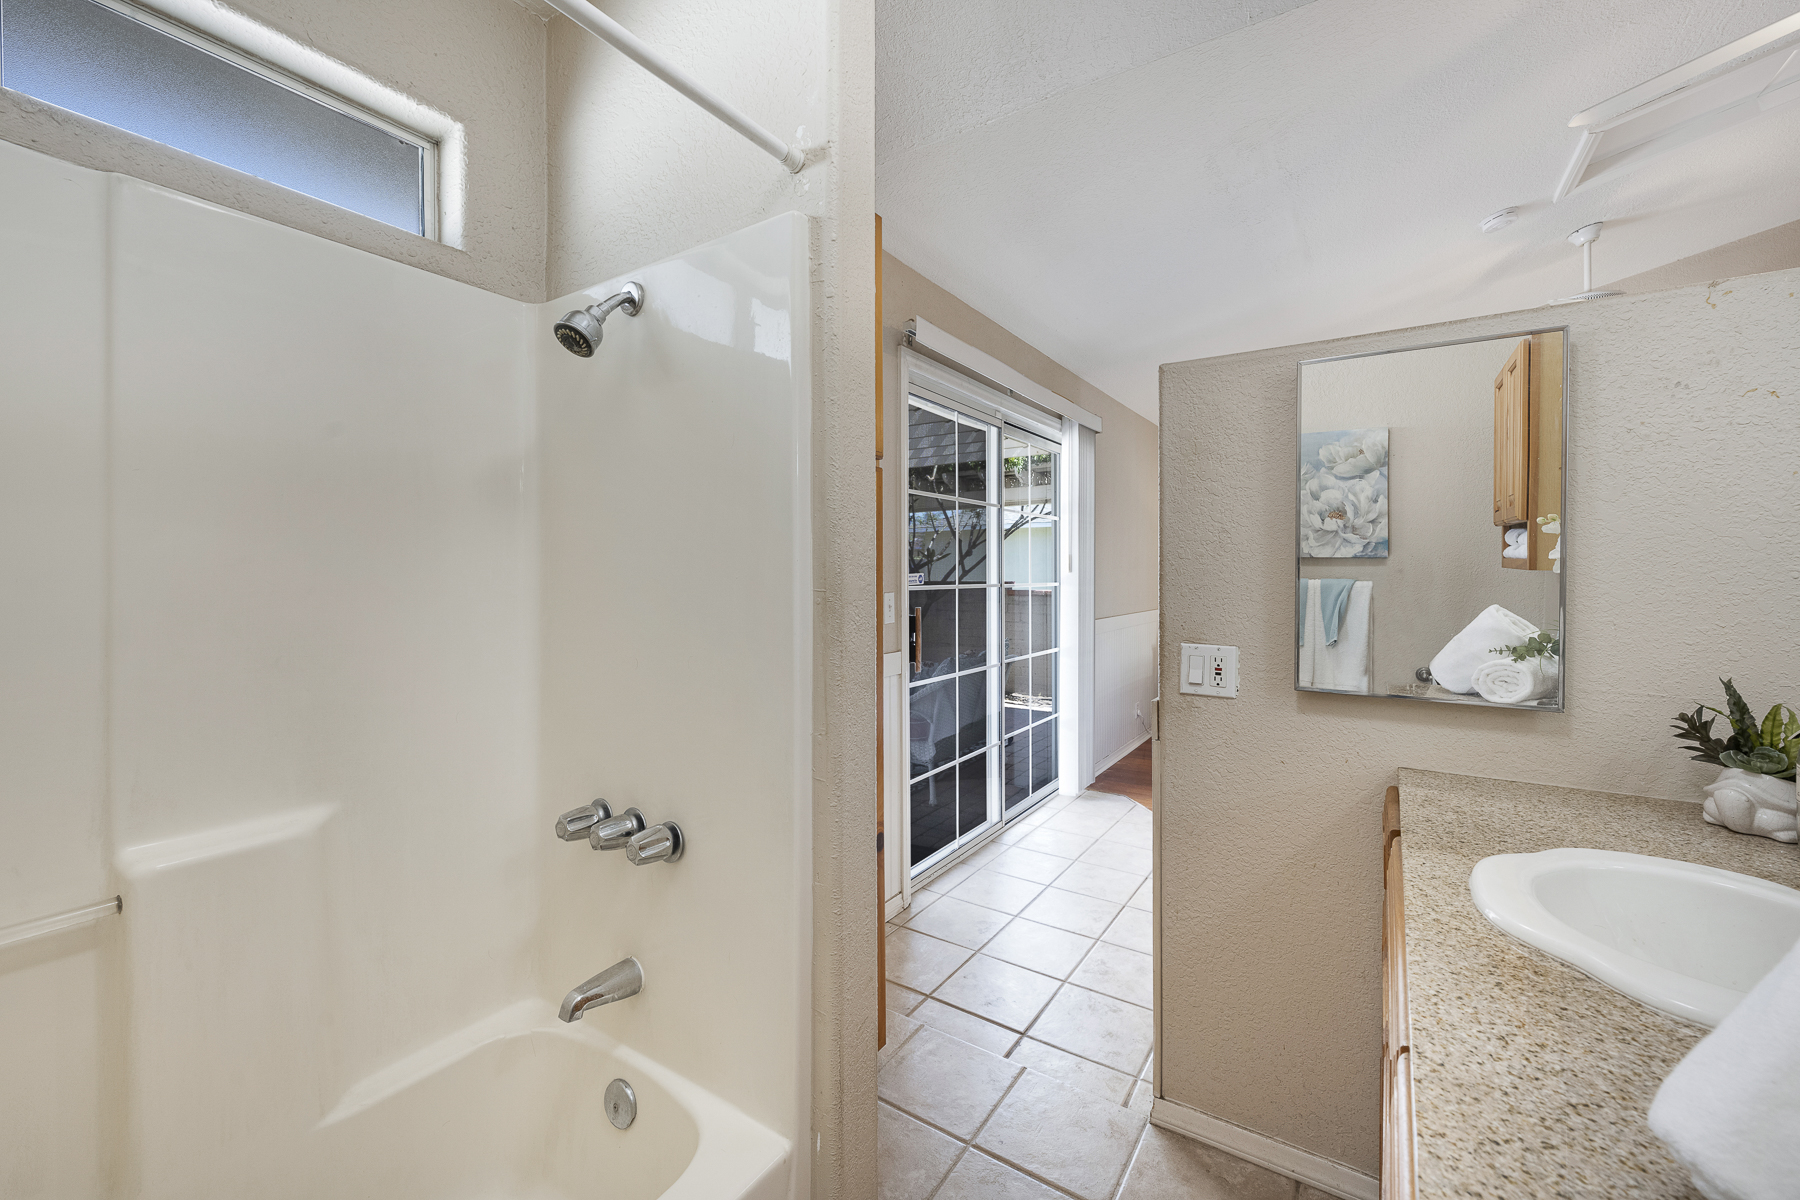 1229 Grove Place Fullerton CA 92831: Master Bathroom shower and sink